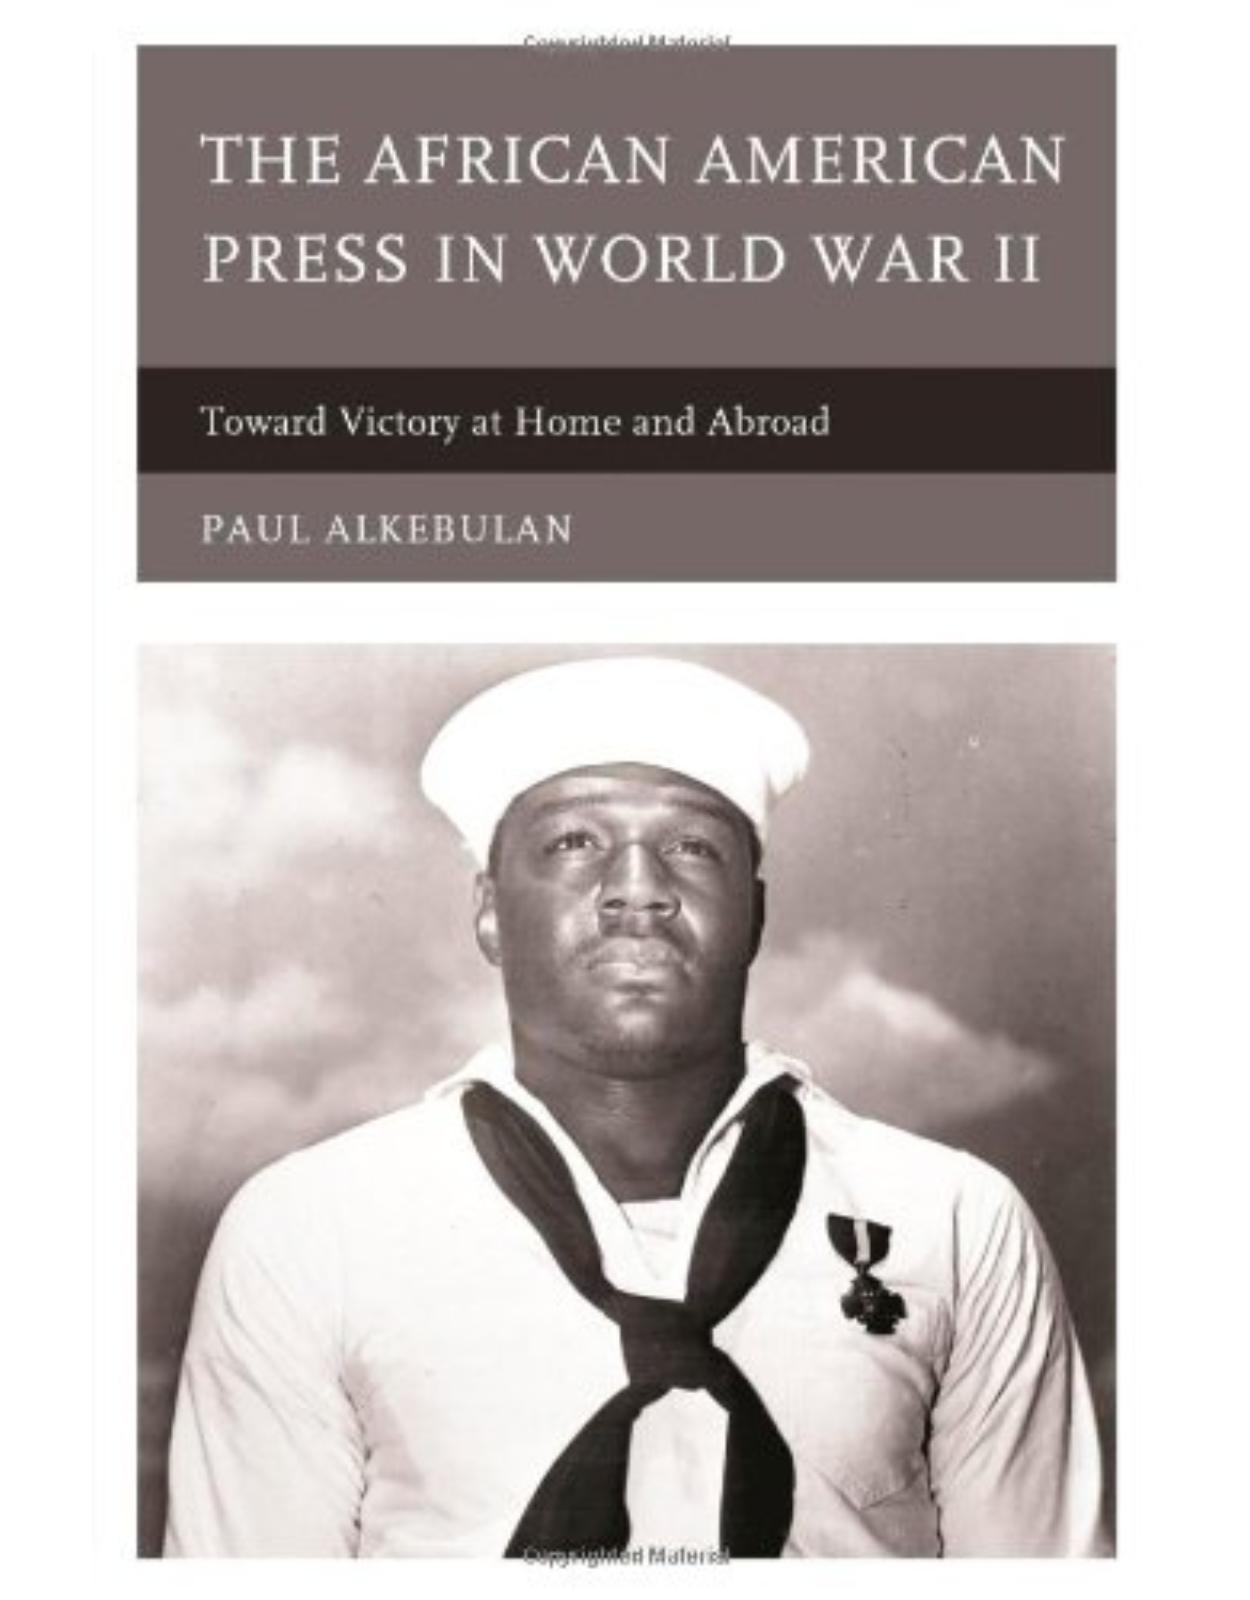 The African American Press in World War II: Toward Victory at Home and Abroad